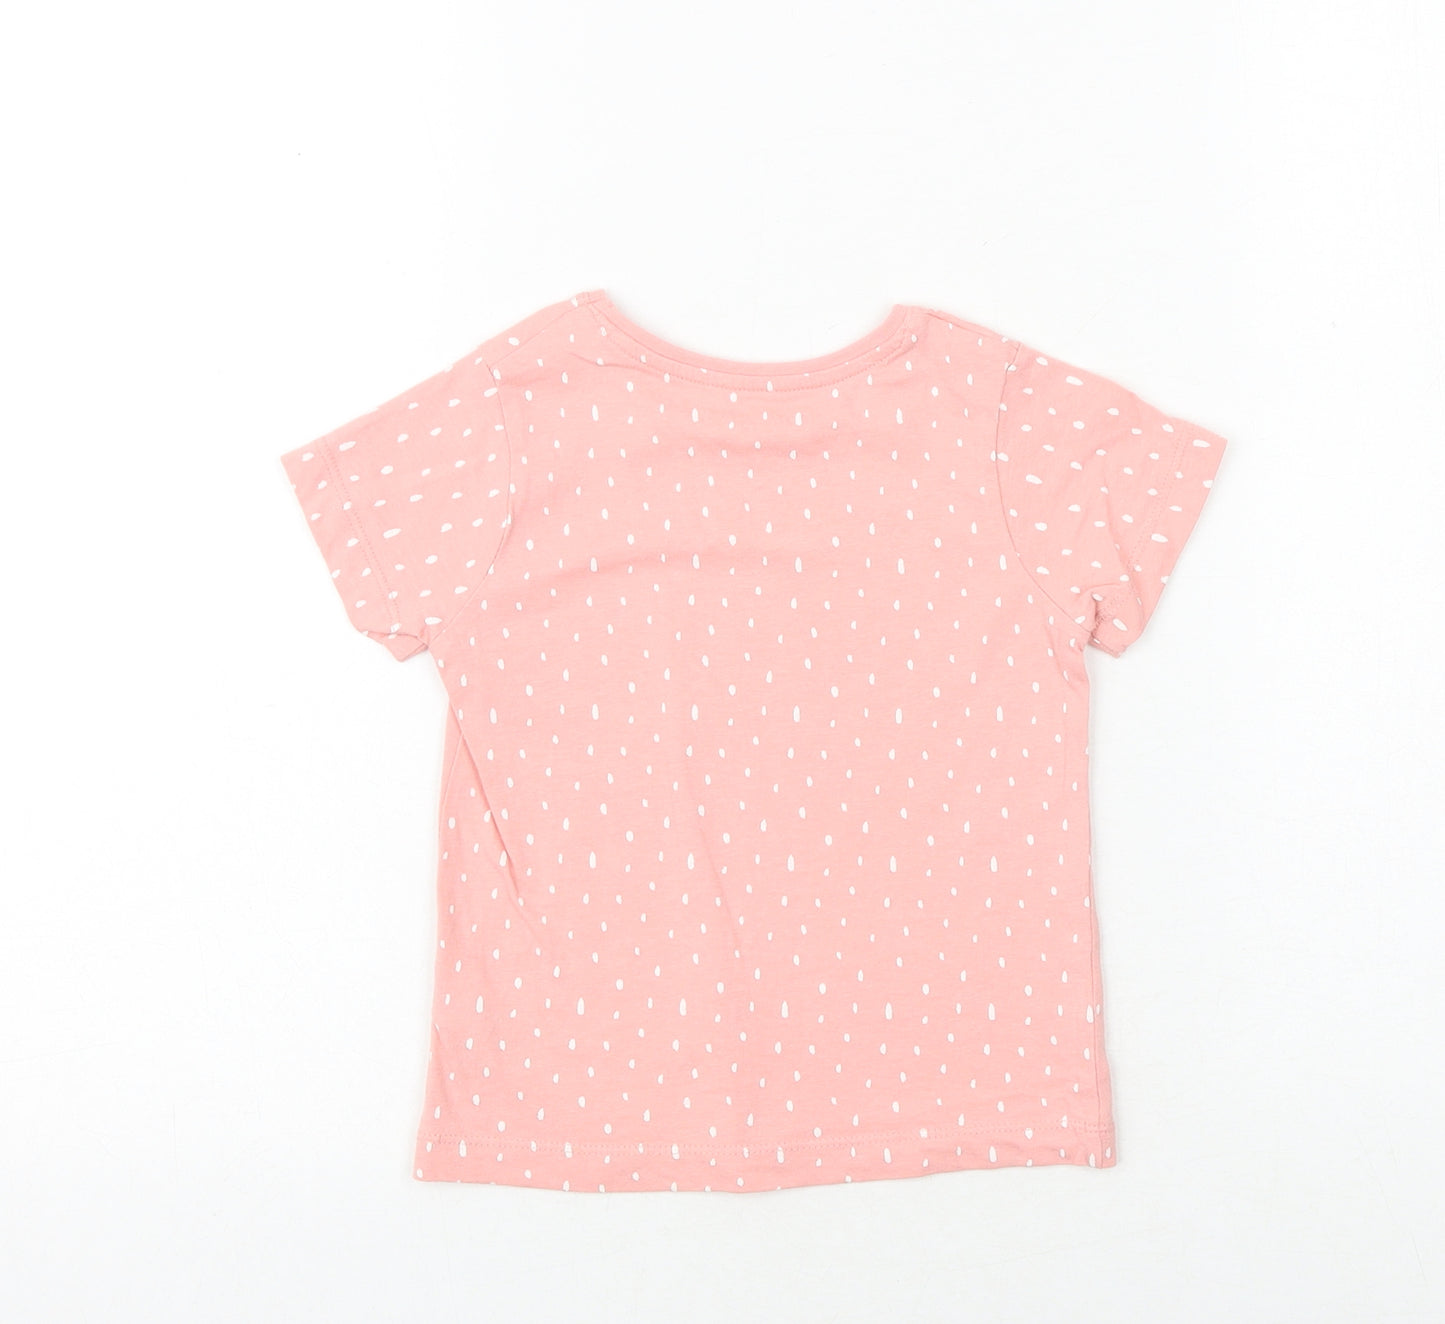 Primark Girls Pink Geometric 100% Cotton Basic T-Shirt Size 2-3 Years Round Neck Pullover - Smile & Pass It On